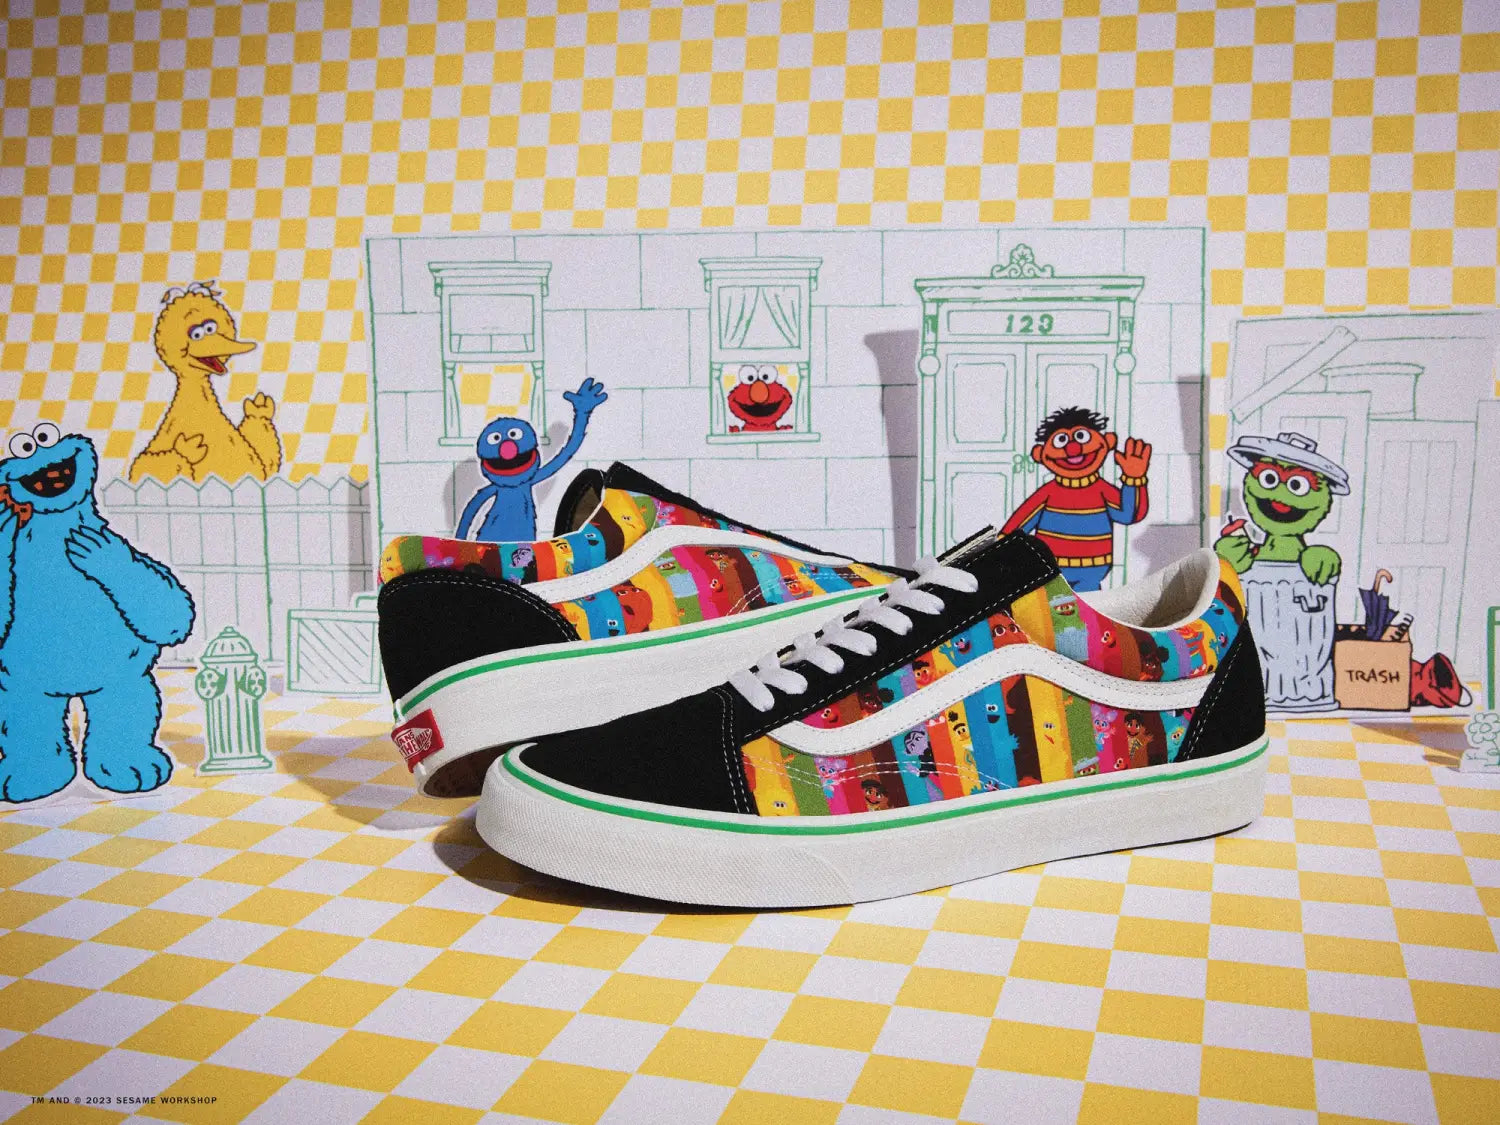 Vans Introduces a Sesame Street Collection Made for the Entire Neighbourhood